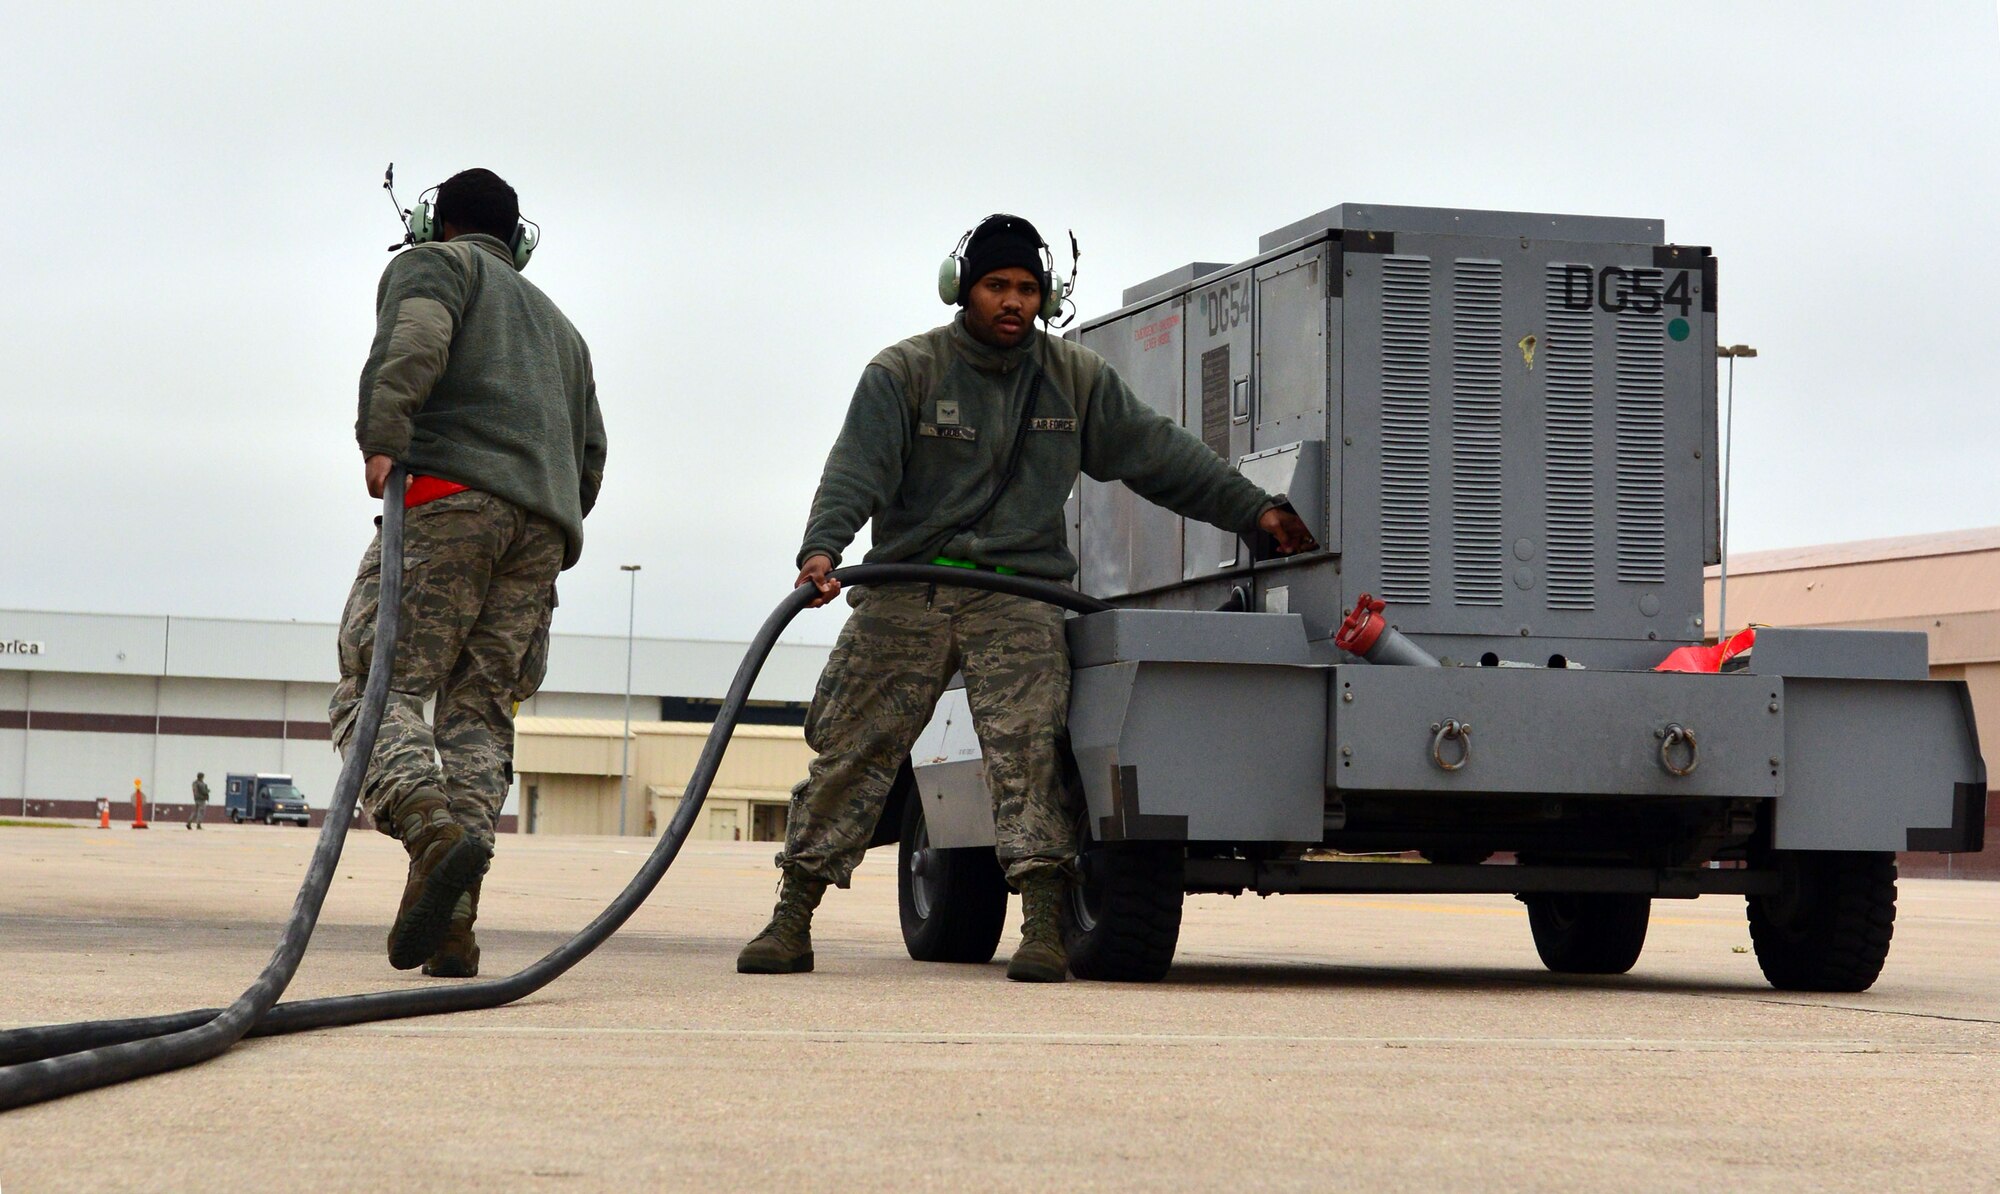 Airman First Class Kejion Madden-Vaughn (left) and Airman First Class Clinton Woods III (right), crew chiefs with the 55th Maintenance Group, shut-down and prepare to move a ground power unit while launching an RC-135 V/W Rivet Joint aircraft during Global Thunder 17, U.S. Strategic Command’s annual command post and field training exercise, Oct. 30, 2016, at Offutt Air Force Base, Neb. The exercise provided training opportunities for USSTRATCOM-tasked components, task forces, units and command posts to deter and, if necessary, defeat a military attack against the United States and to employ forces as directed by the President. (U.S. Air Force Photo by Drew Nystrom)